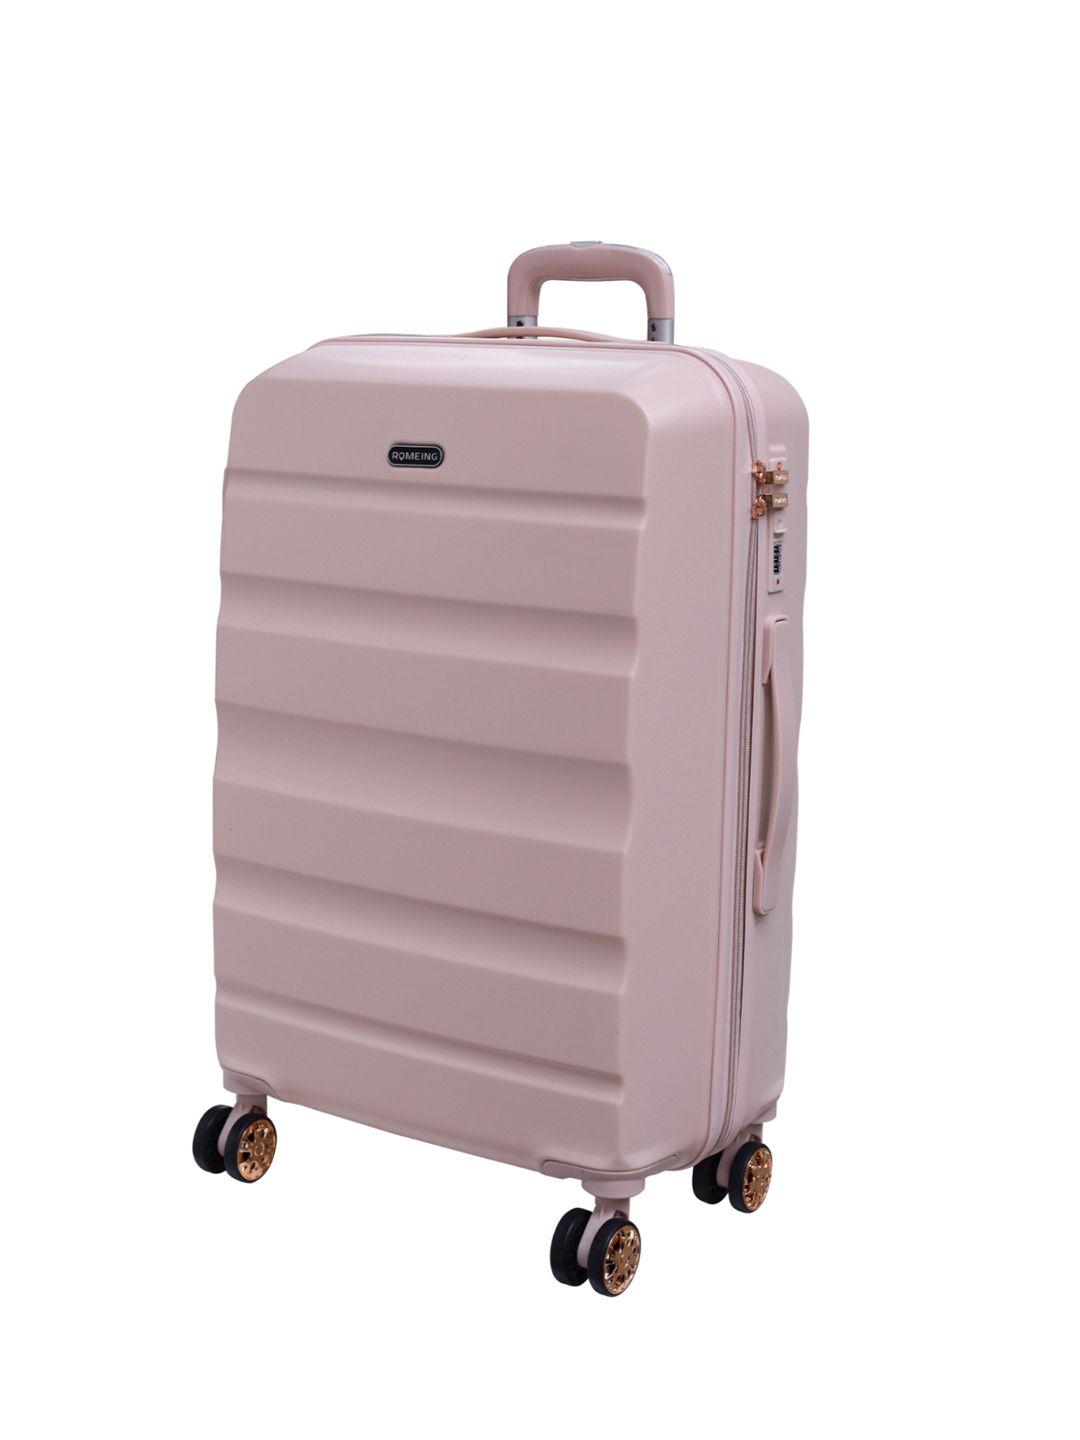 romeing venice pink textured hard sided polycarbonate medium trolley suitcase